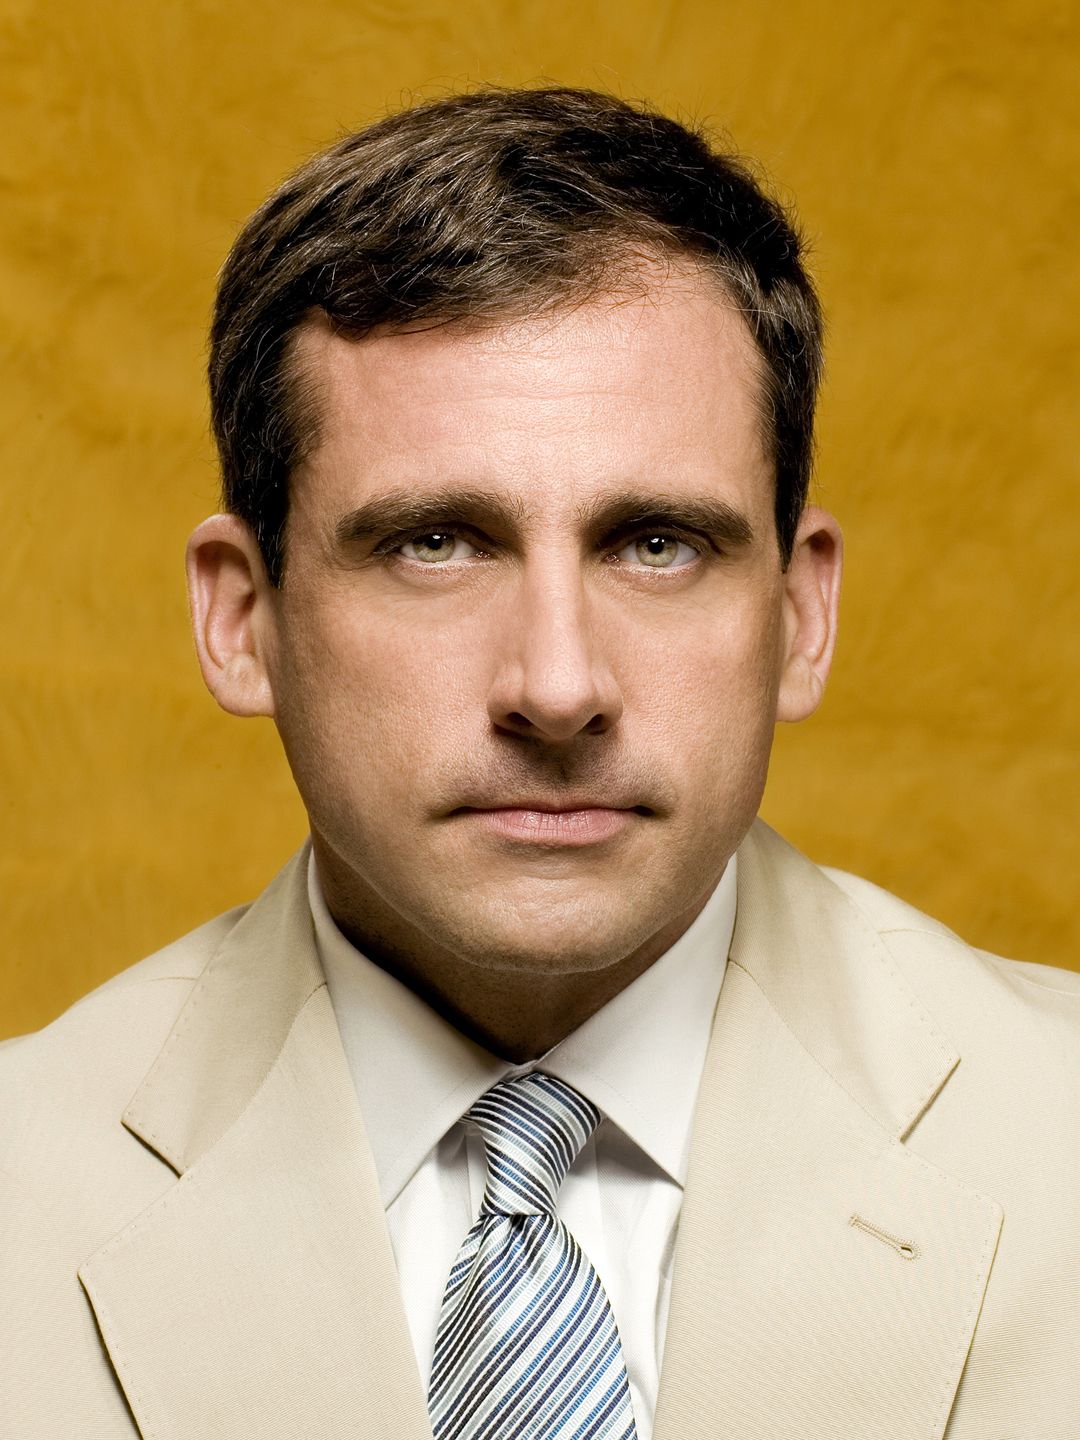 Steve Carell in his youth